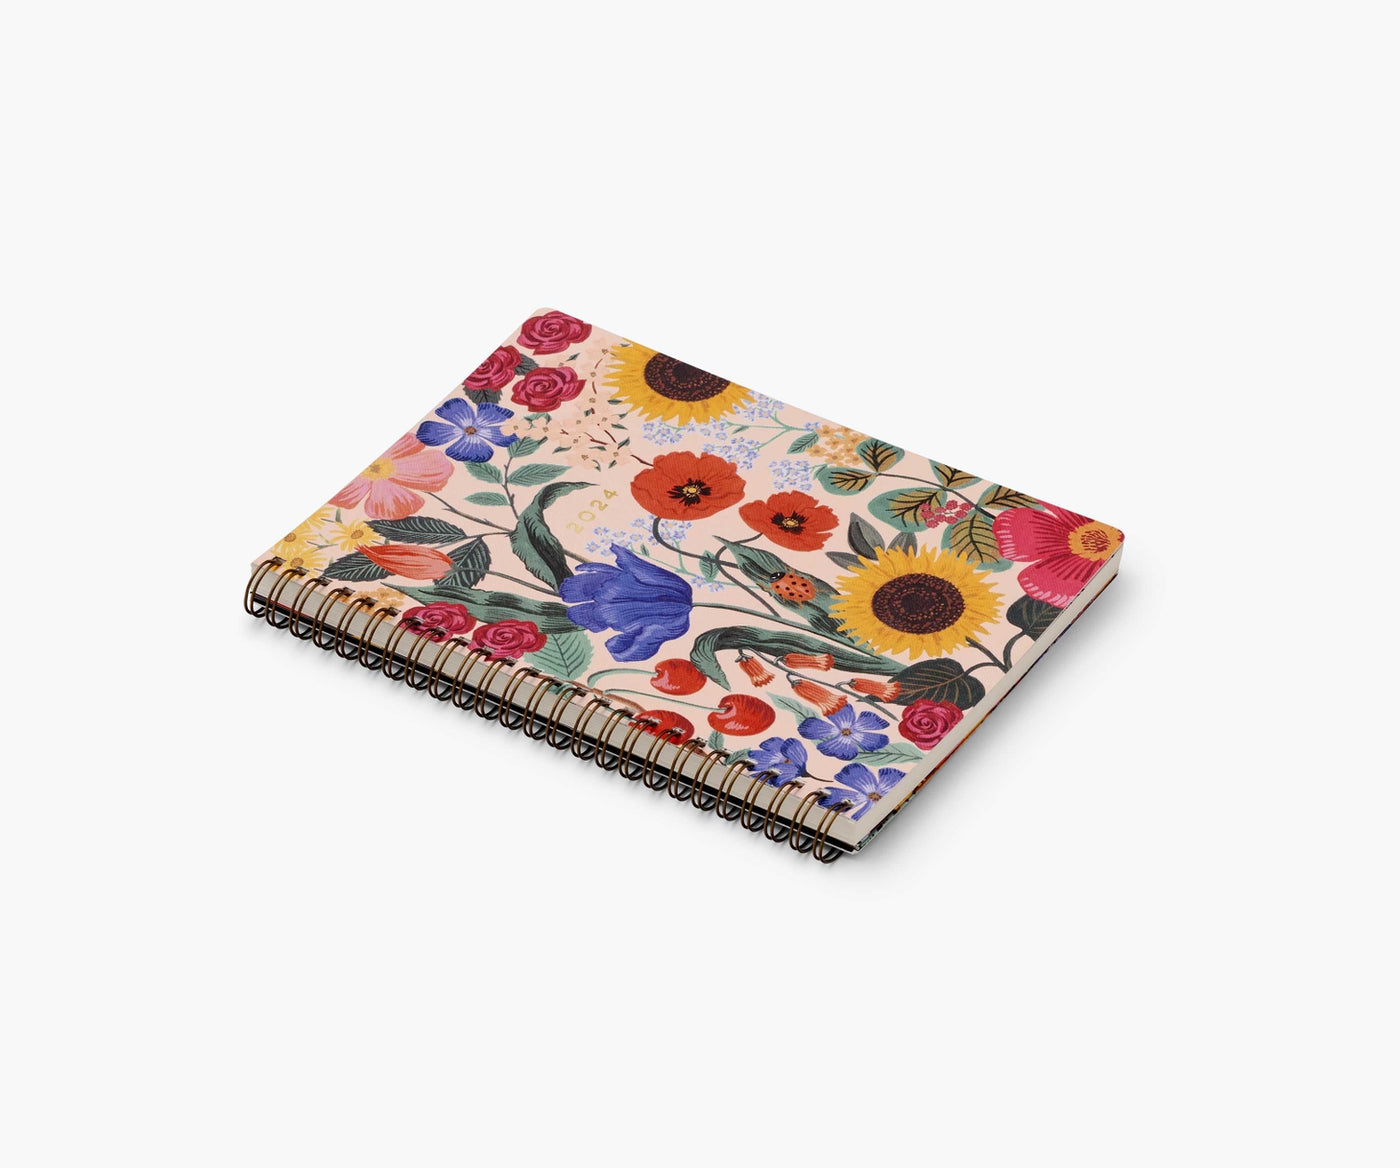 2024 Blossom 12-Month Softcover Spiral Planner